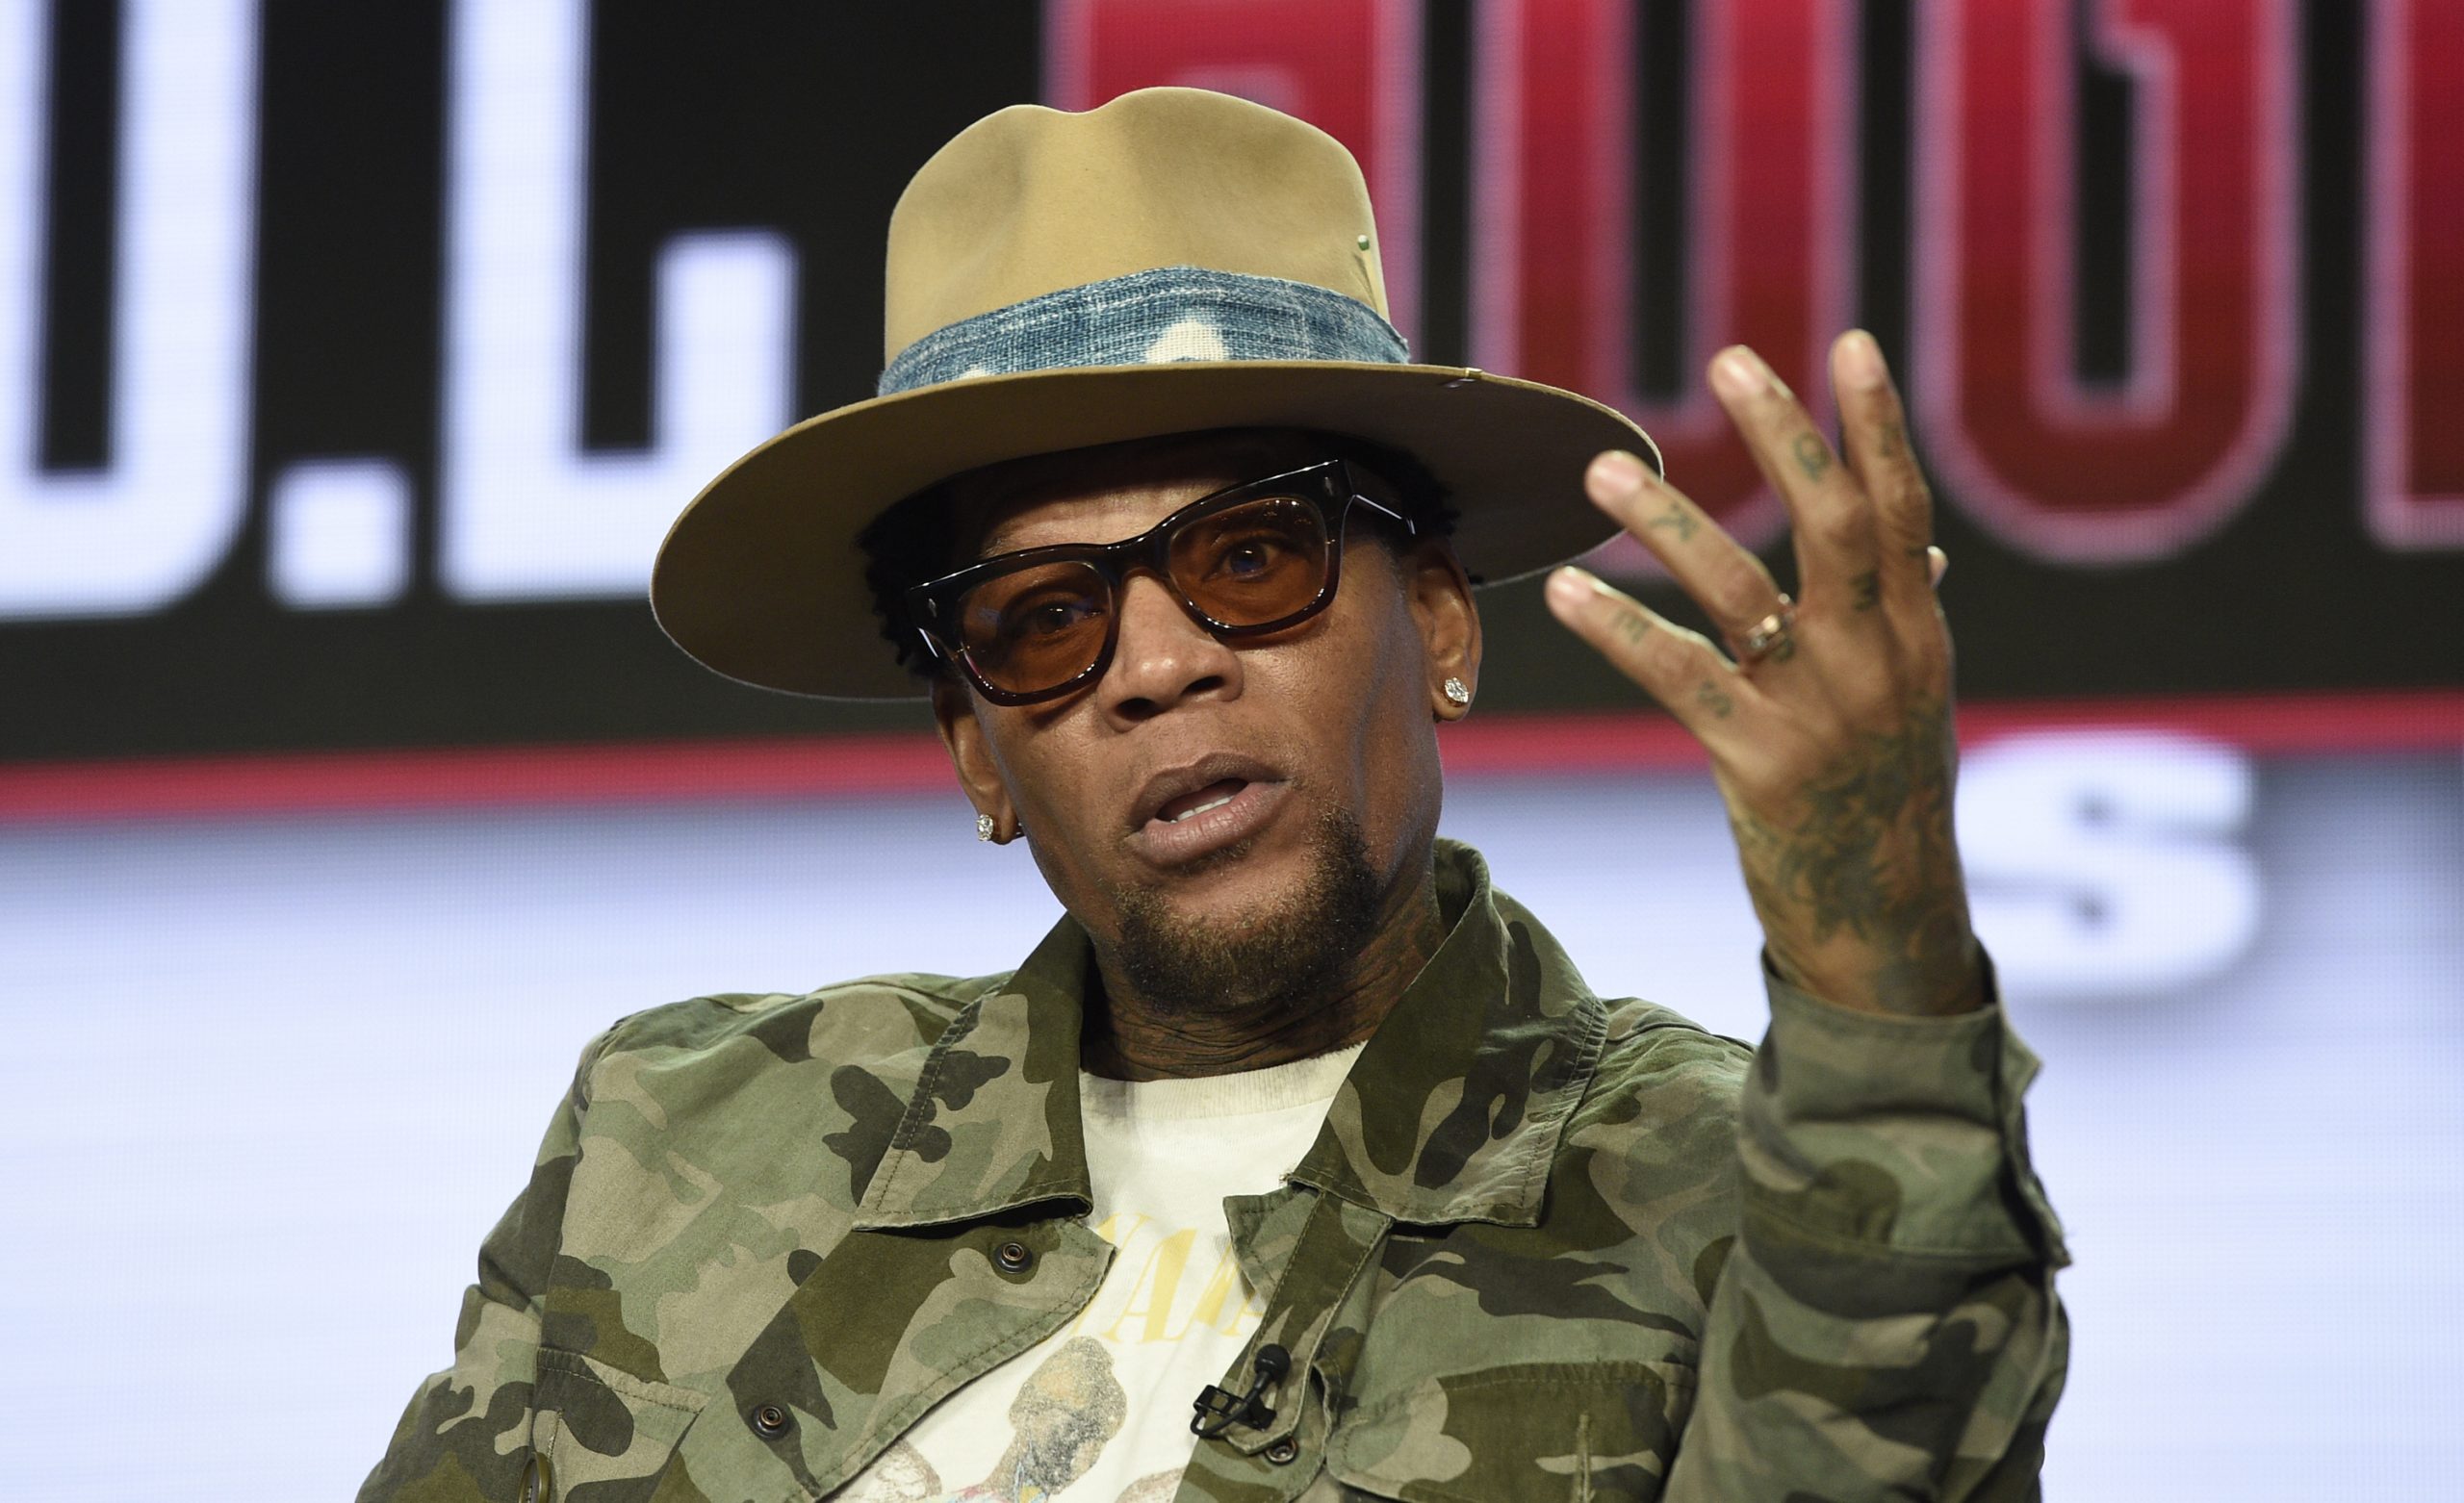 Stand-up comedian D.L. Hughley, pictured in a 2019 file photo.